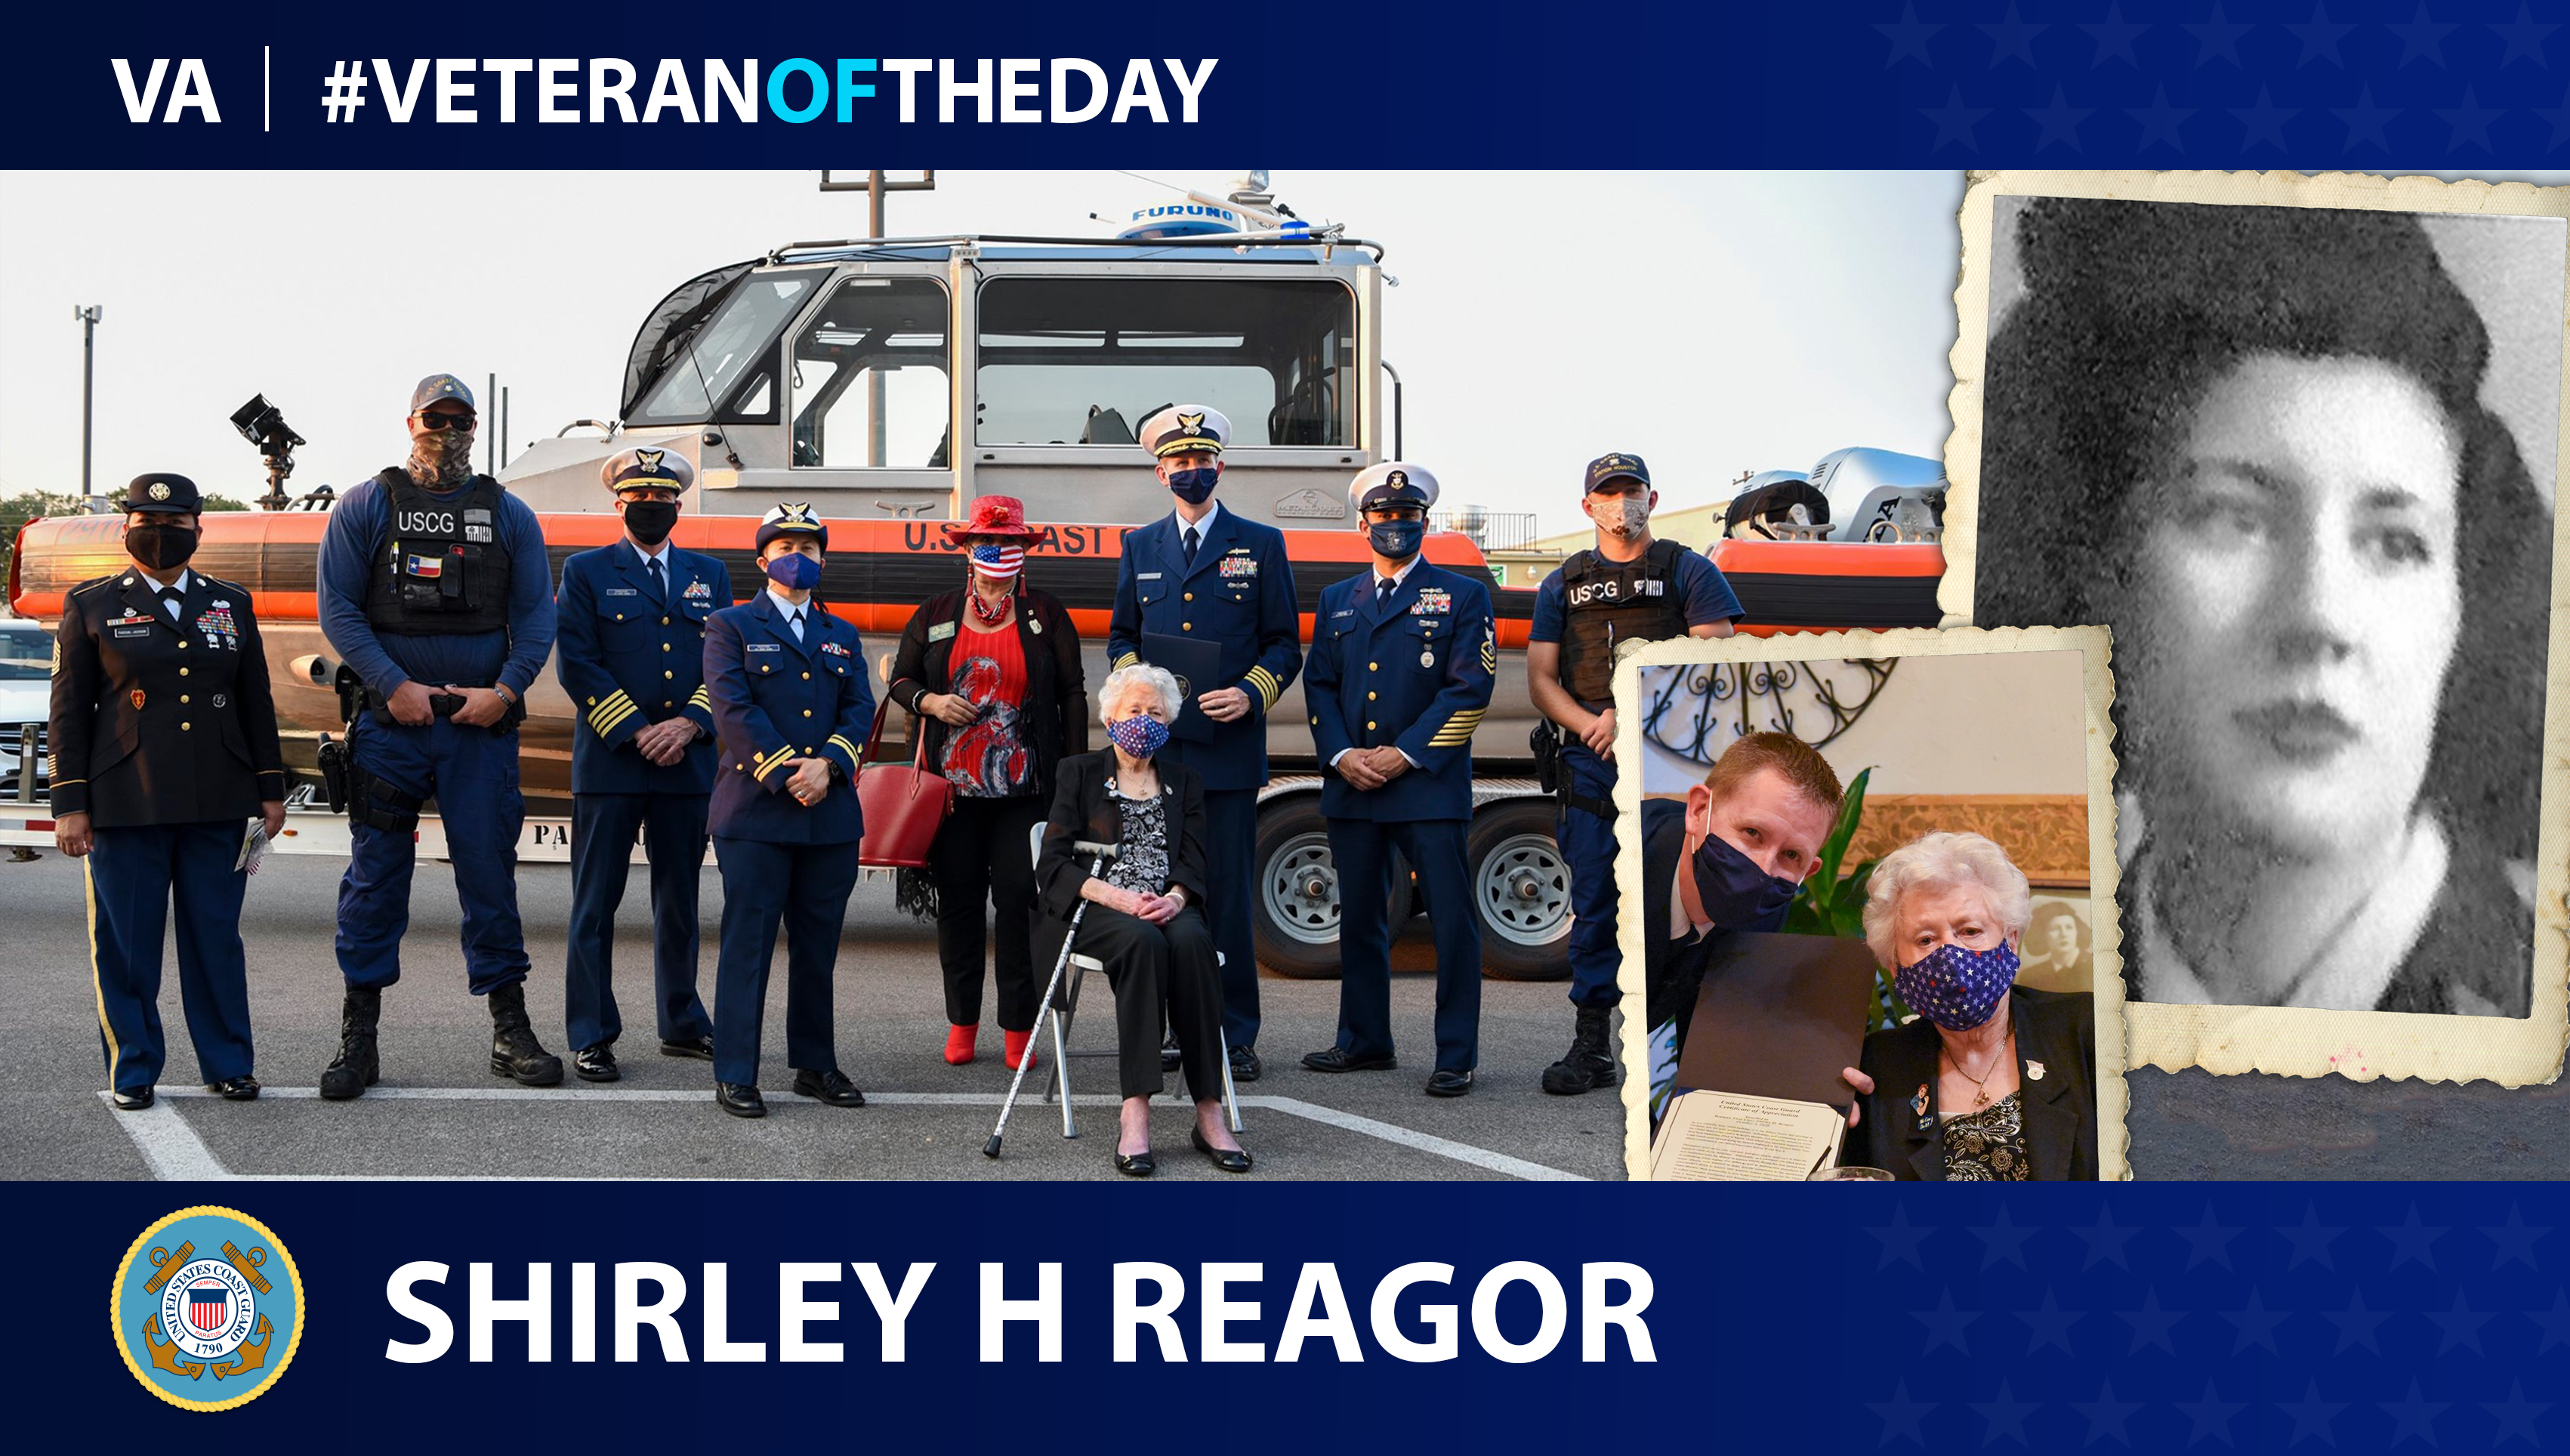 Coast Guard Veteran Shirley H. Reagor is today's Veteran of the Day.